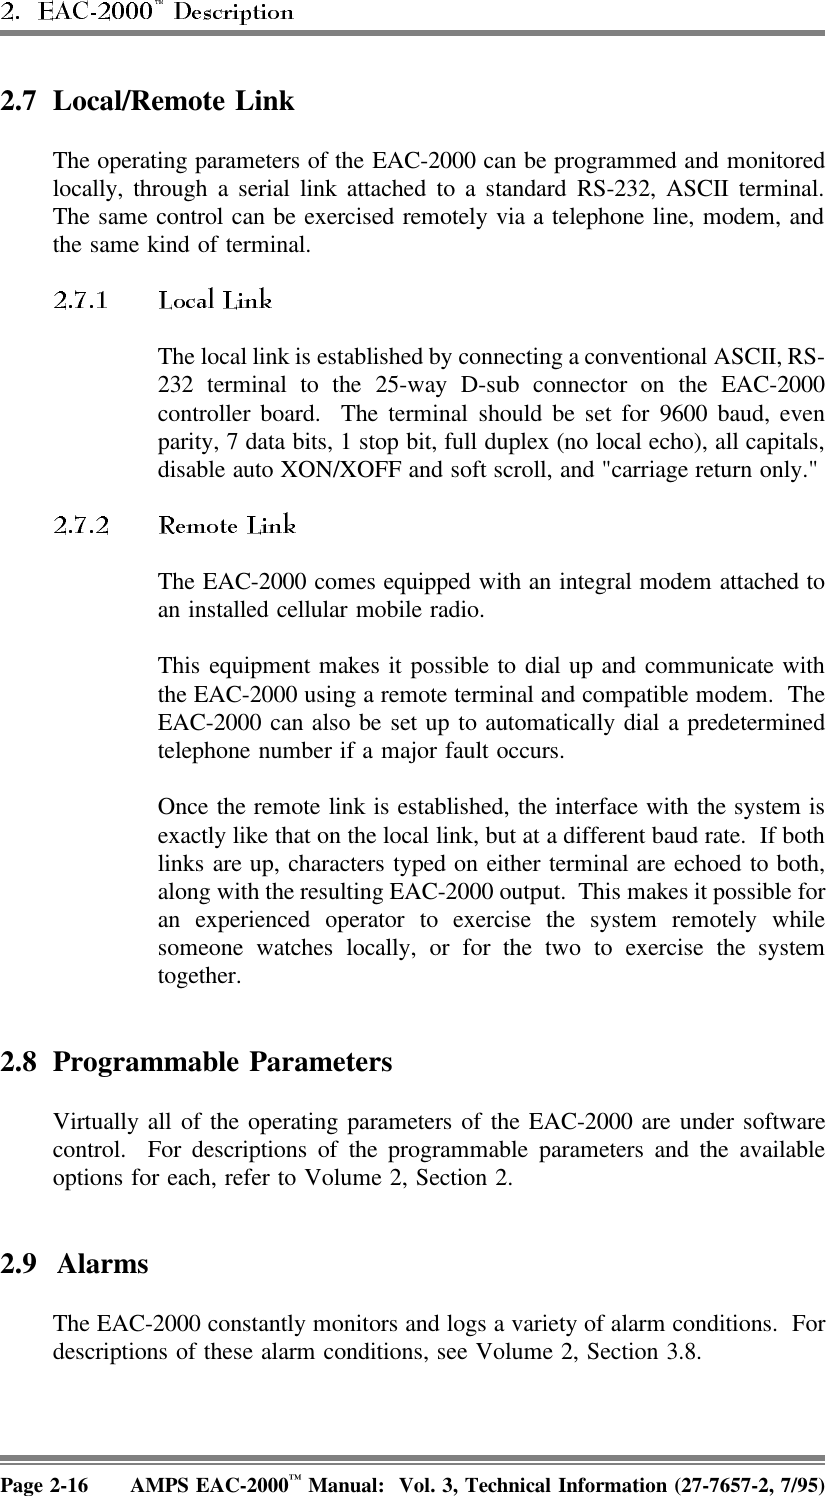 2.7 Local/Remote LinkThe operating parameters of the EAC-2000 can be programmed and monitoredlocally, through a serial link attached to a standard RS-232, ASCII terminal.The same control can be exercised remotely via a telephone line, modem, andthe same kind of terminal.The local link is established by connecting a conventional ASCII, RS-232 terminal to the 25-way D-sub connector on the EAC-2000controller board.  The terminal should be set for 9600 baud, evenparity, 7 data bits, 1 stop bit, full duplex (no local echo), all capitals,disable auto XON/XOFF and soft scroll, and &quot;carriage return only.&quot; The EAC-2000 comes equipped with an integral modem attached toan installed cellular mobile radio.This equipment makes it possible to dial up and communicate withthe EAC-2000 using a remote terminal and compatible modem.  TheEAC-2000 can also be set up to automatically dial a predeterminedtelephone number if a major fault occurs.Once the remote link is established, the interface with the system isexactly like that on the local link, but at a different baud rate.  If bothlinks are up, characters typed on either terminal are echoed to both,along with the resulting EAC-2000 output.  This makes it possible foran experienced operator to exercise the system remotely whilesomeone watches locally, or for the two to exercise the systemtogether.2.8 Programmable ParametersVirtually all of the operating parameters of the EAC-2000 are under softwarecontrol.  For descriptions of the programmable parameters and the availableoptions for each, refer to Volume 2, Section 2. 2.9 AlarmsThe EAC-2000 constantly monitors and logs a variety of alarm conditions.  Fordescriptions of these alarm conditions, see Volume 2, Section 3.8.Page 2-16 AMPS EAC-2000™ Manual:  Vol. 3, Technical Information (27-7657-2, 7/95)